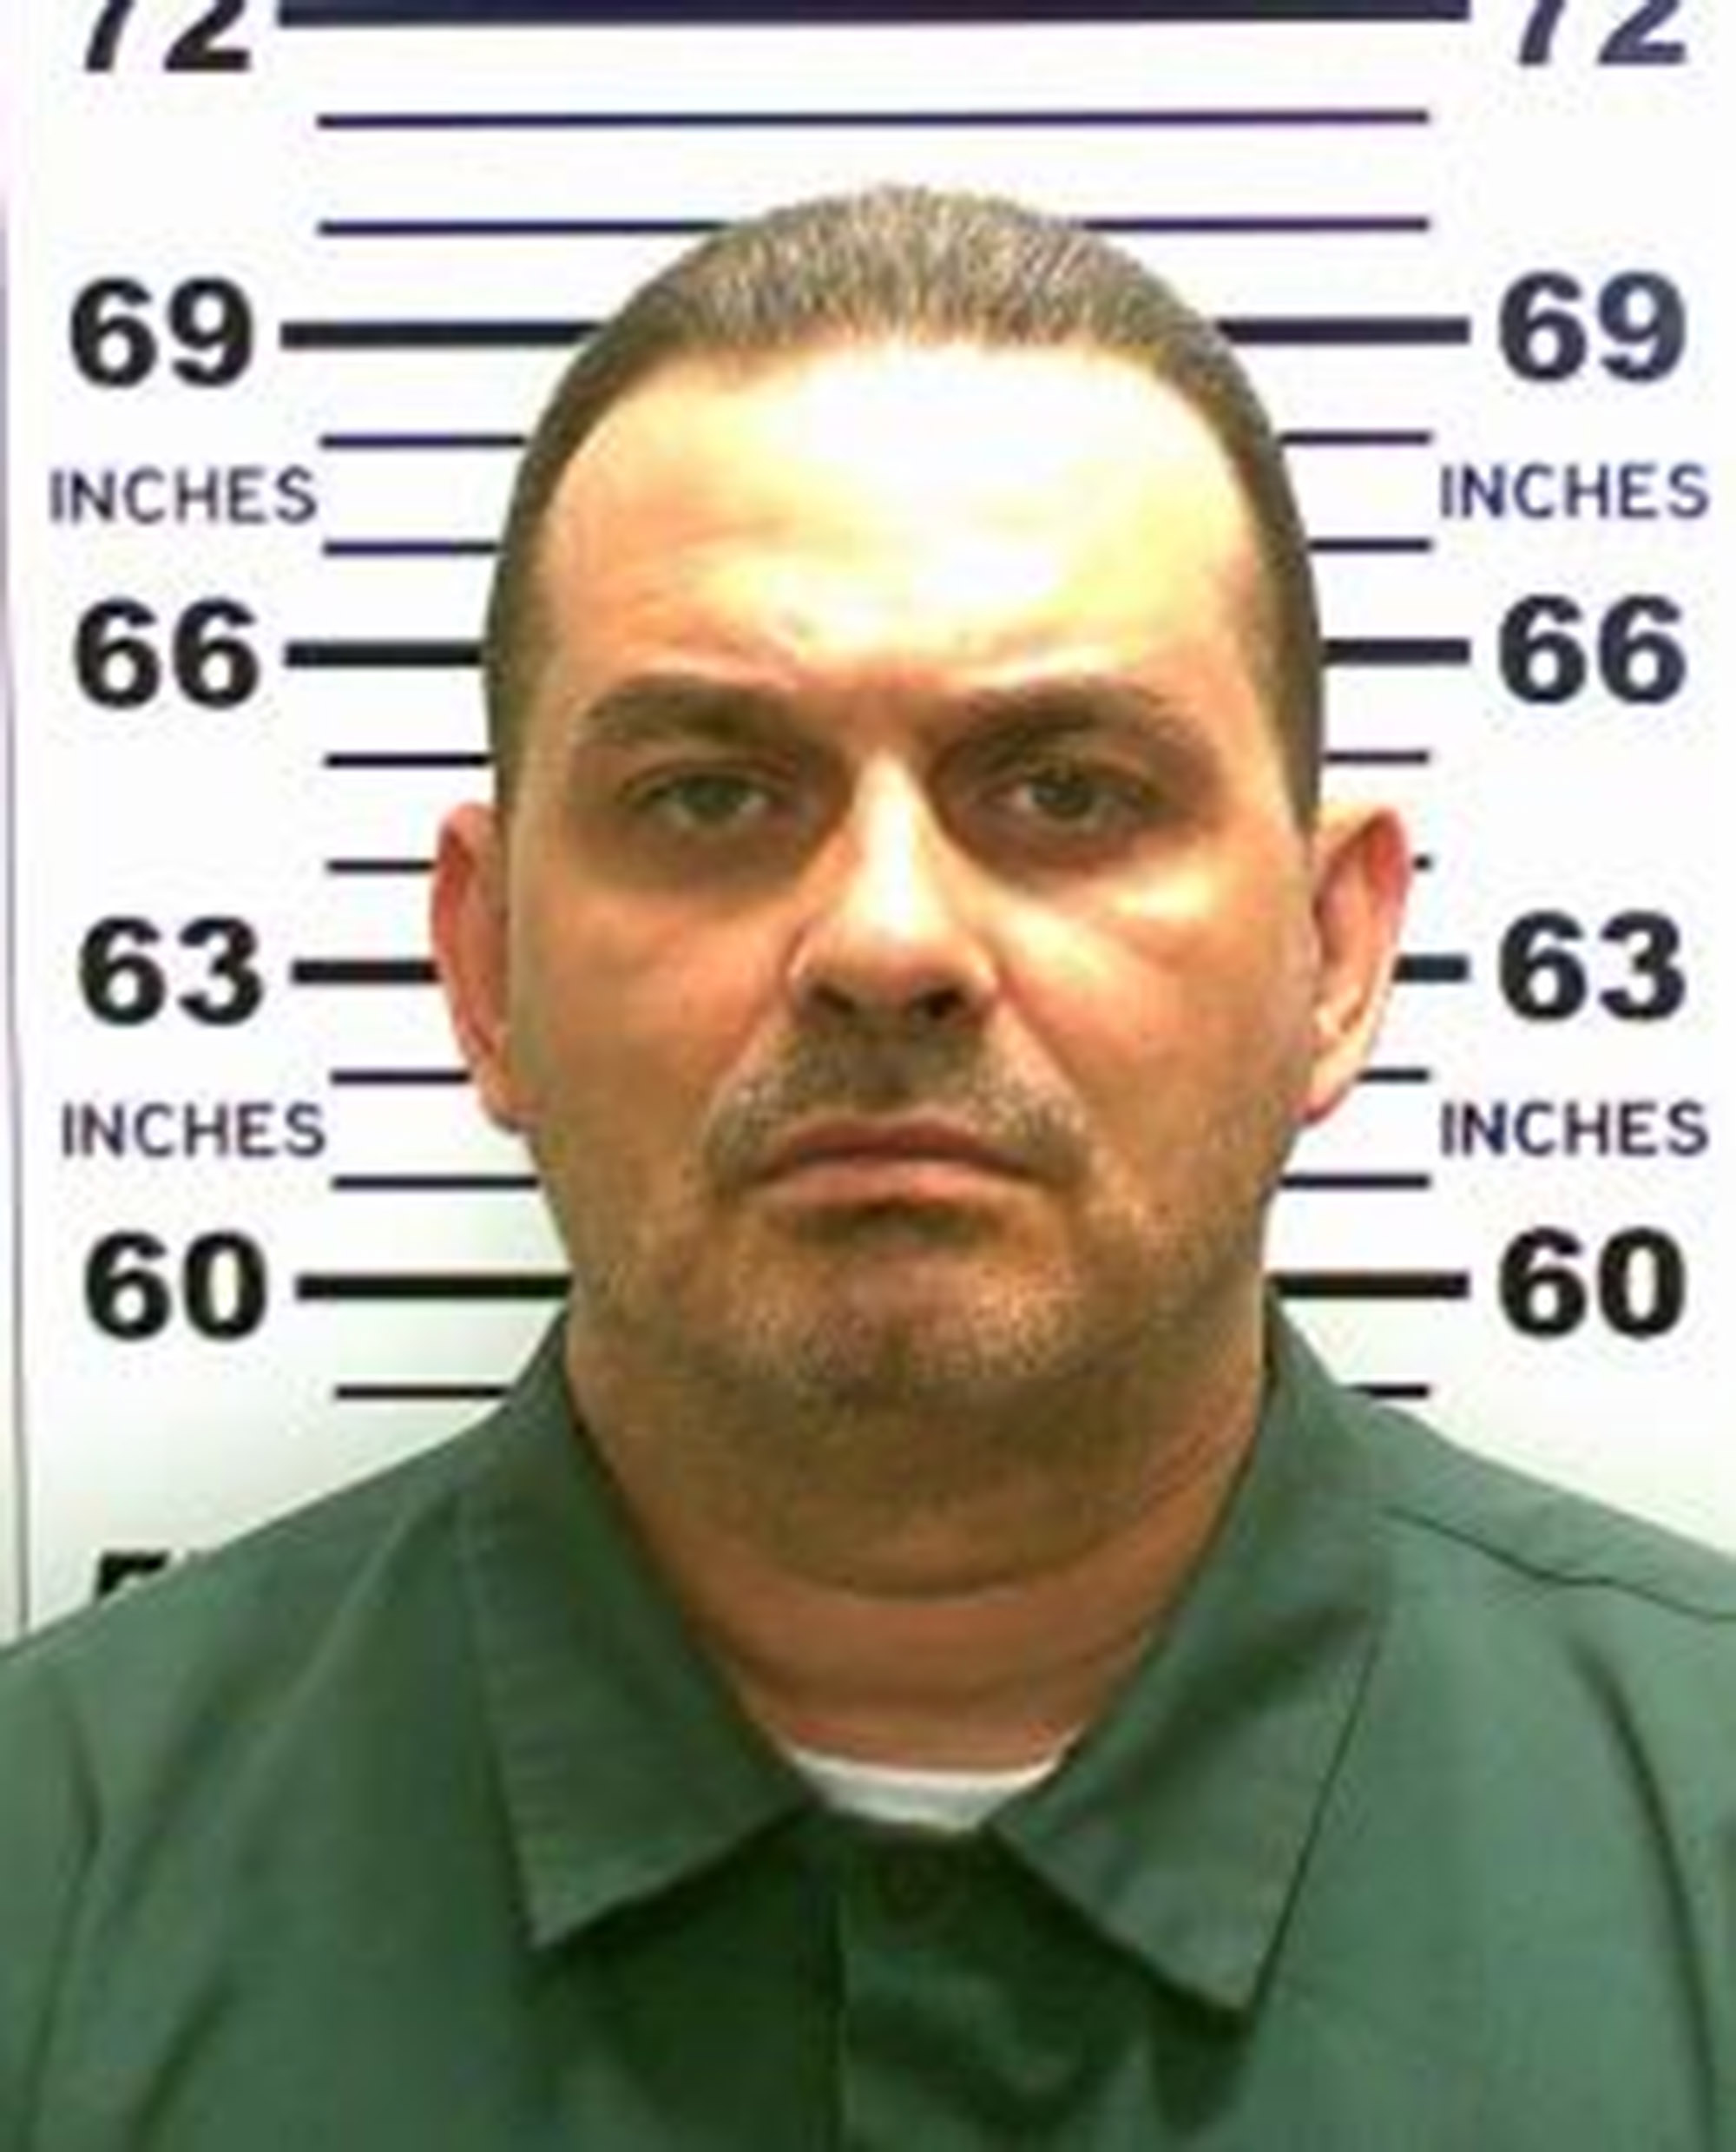 In this handout from New York State Police, convicted murderer Richard Matt is shown. (Handout&mdash;Getty Images)